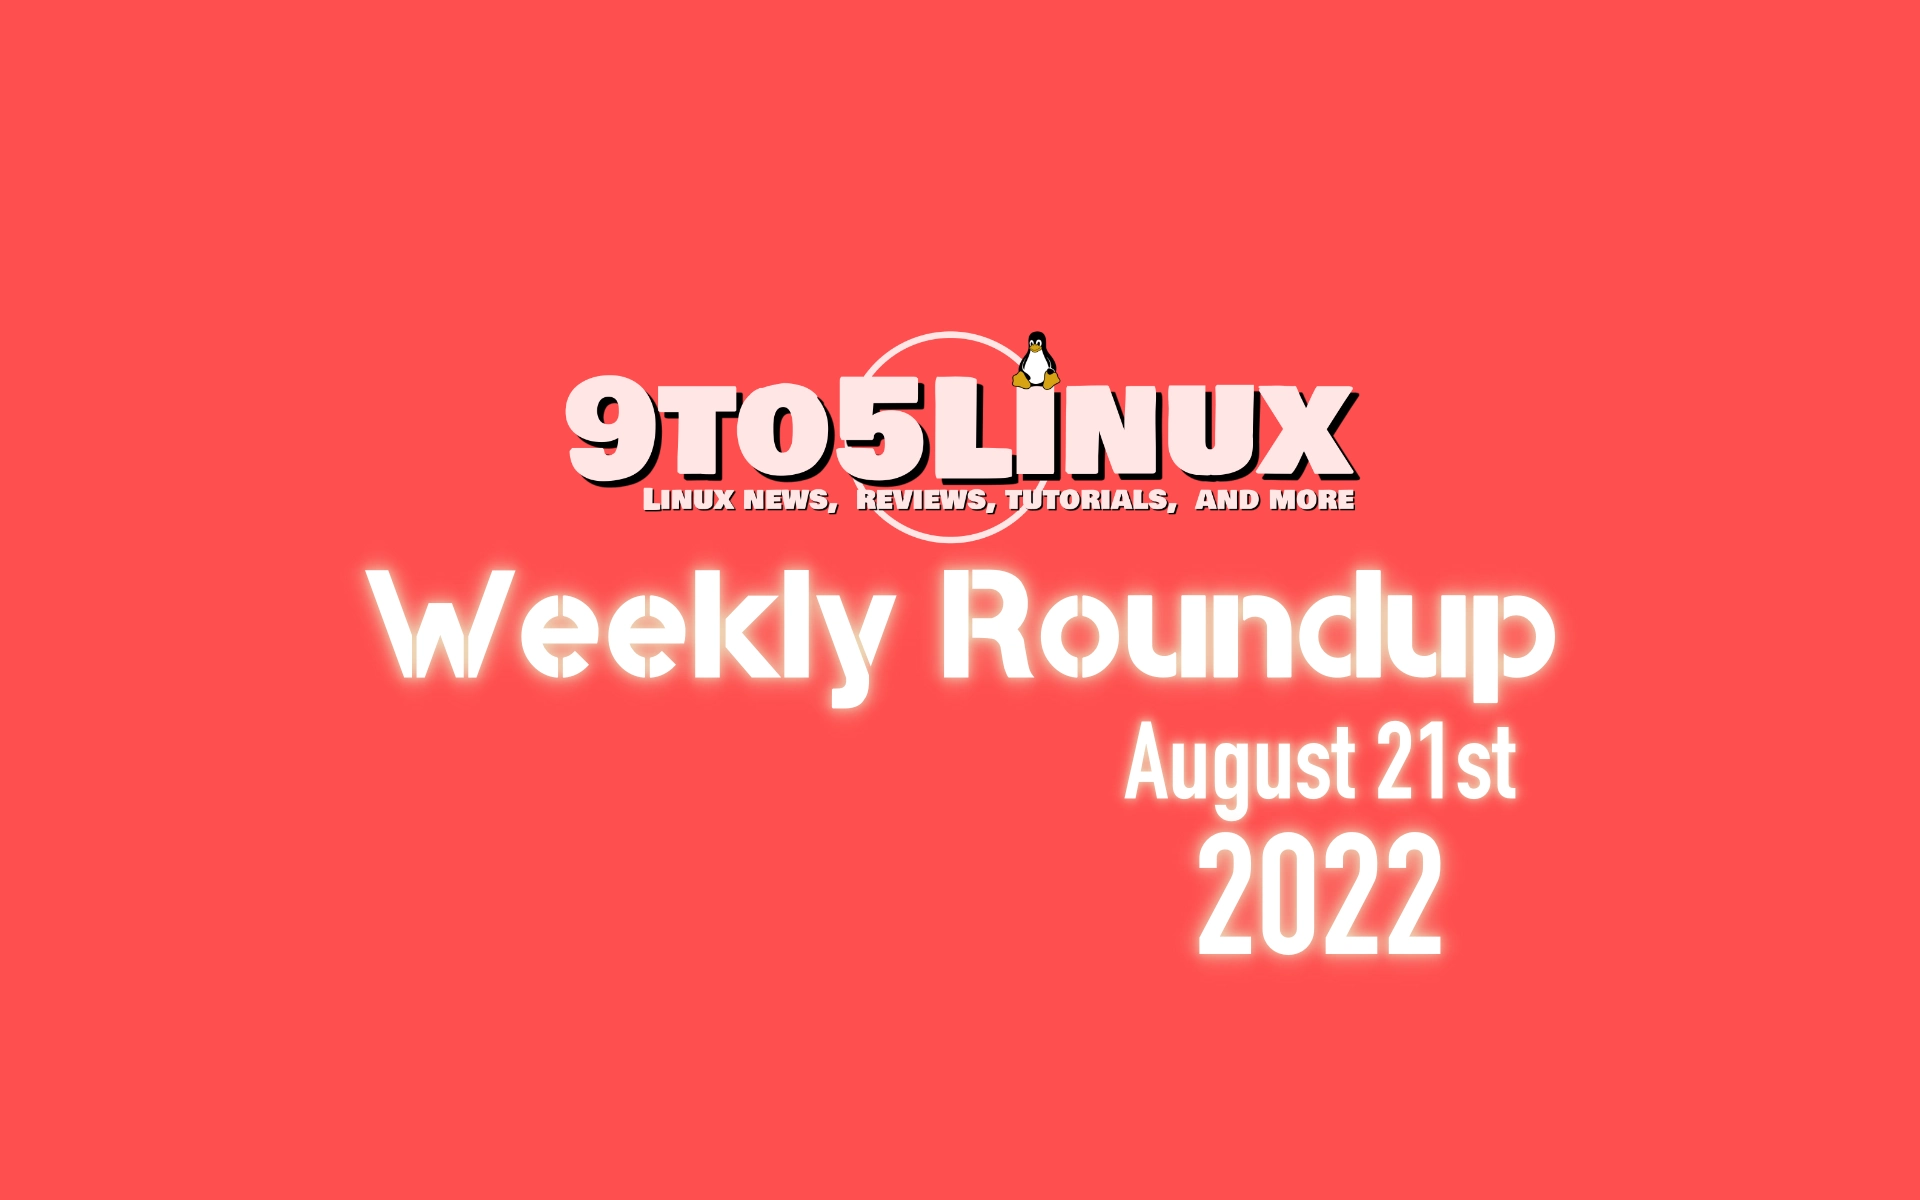 9to5Linux Weekly Roundup: August 21st, 2022